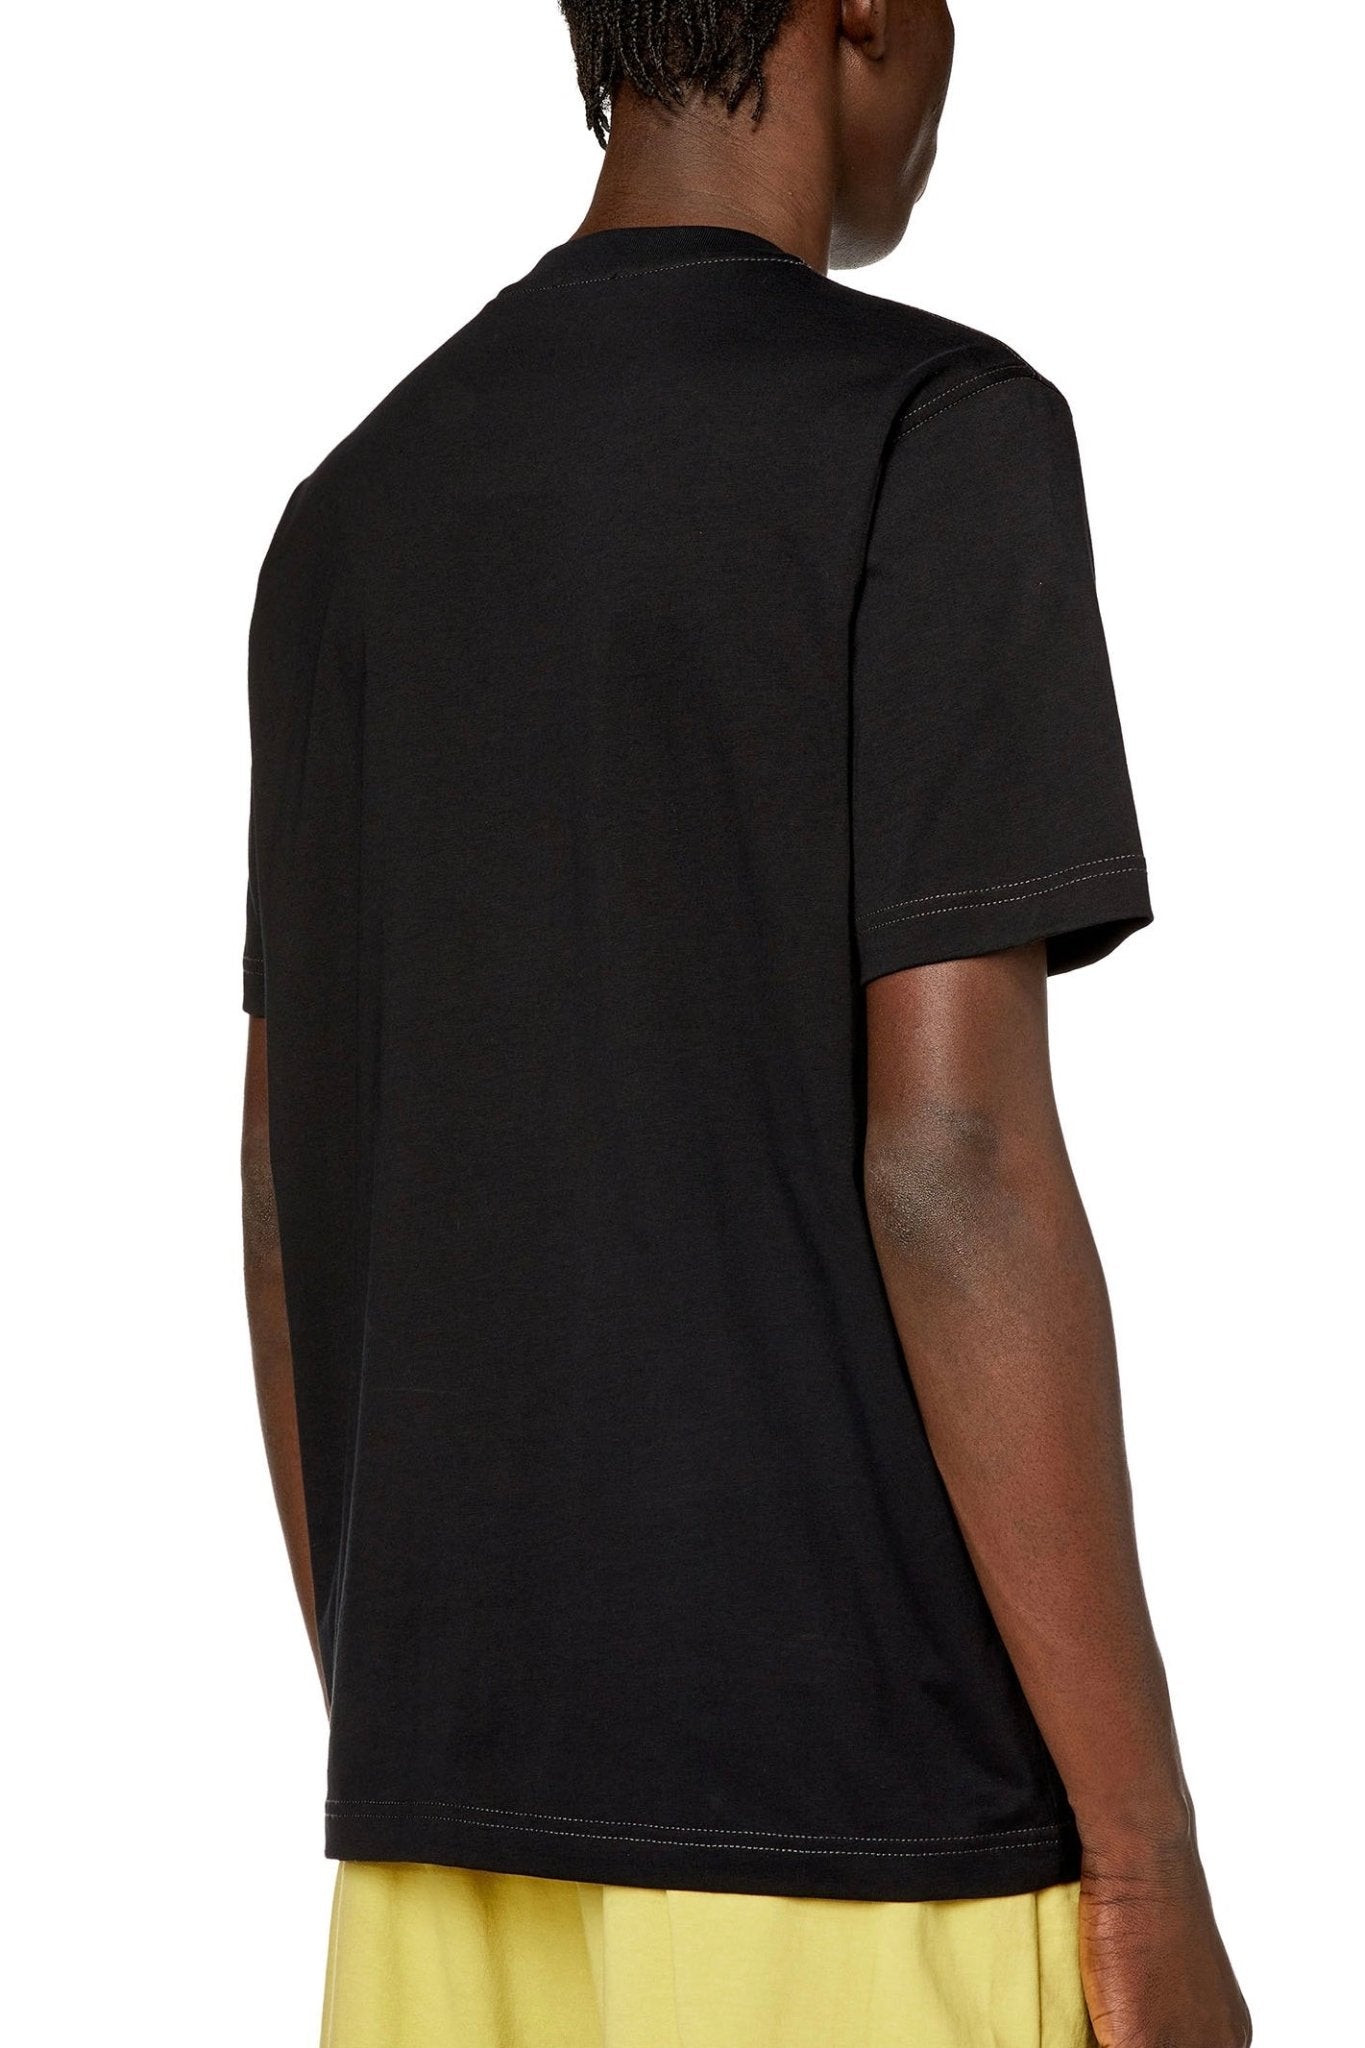 Person wearing a Diesel DIESEL T-JUST-N12 black organic cotton jersey men's T-shirt viewed from the back.